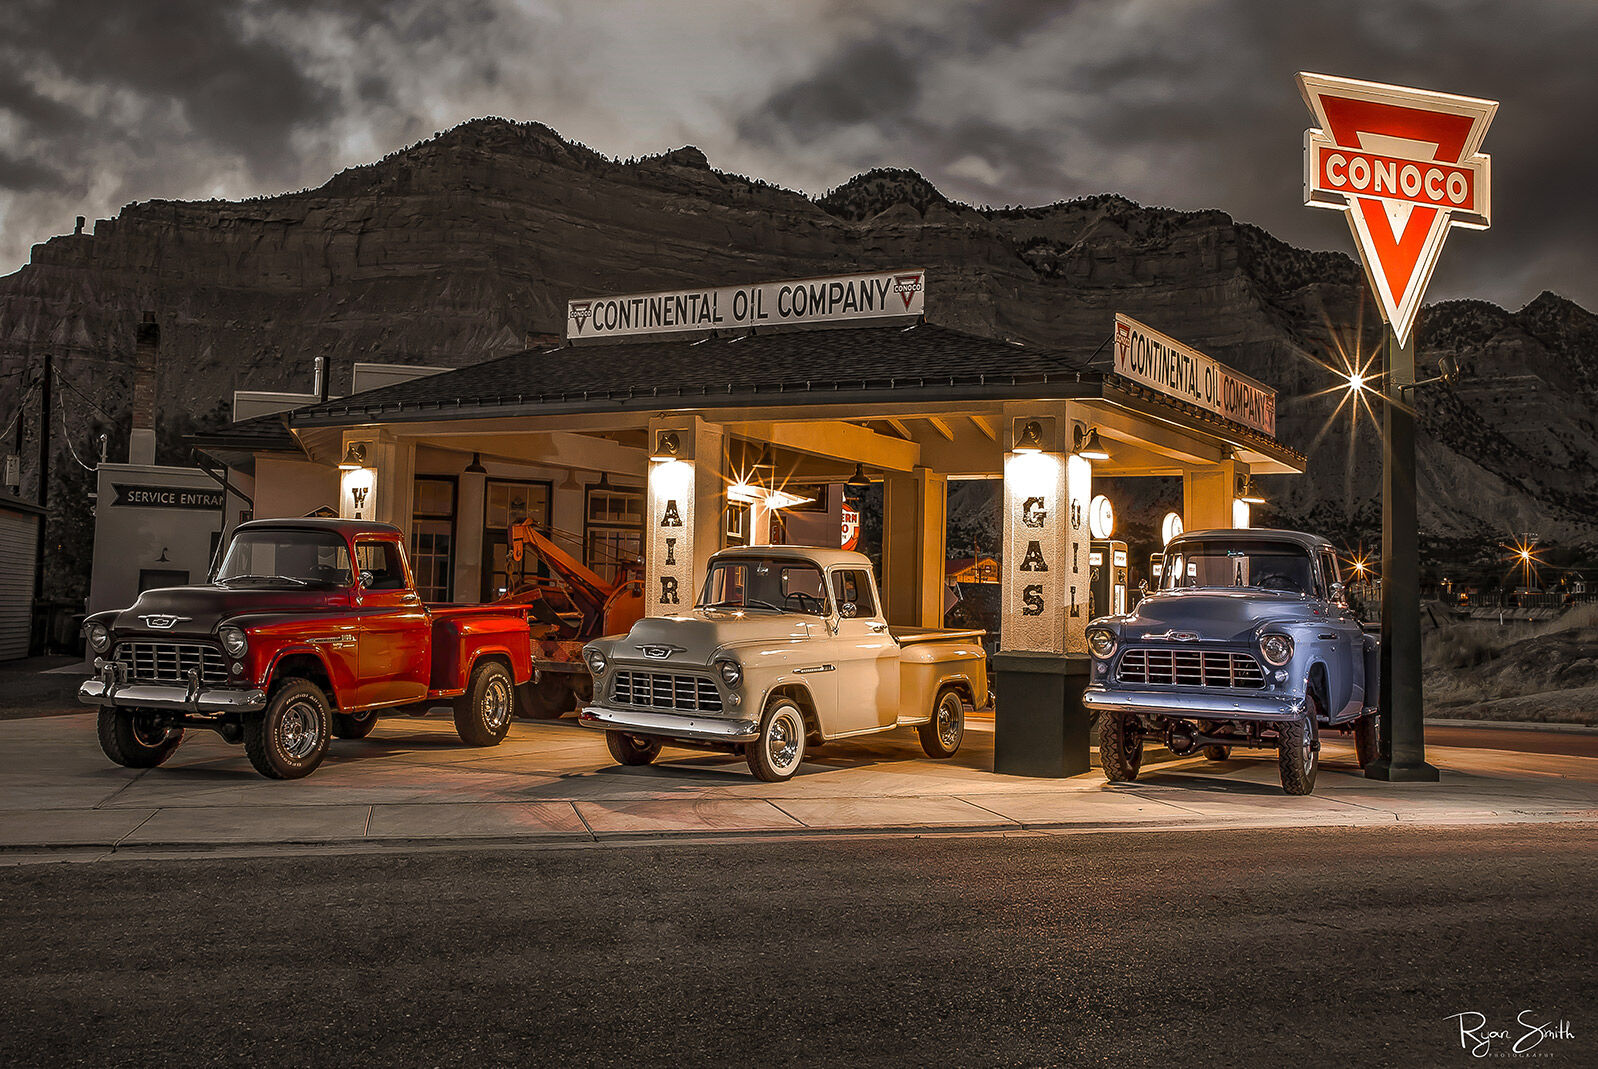 Three vintage Chevy trucks in red, white, & blue sit at a classic Conoco gas station with mountains and sky in the background in black and white as night falls.